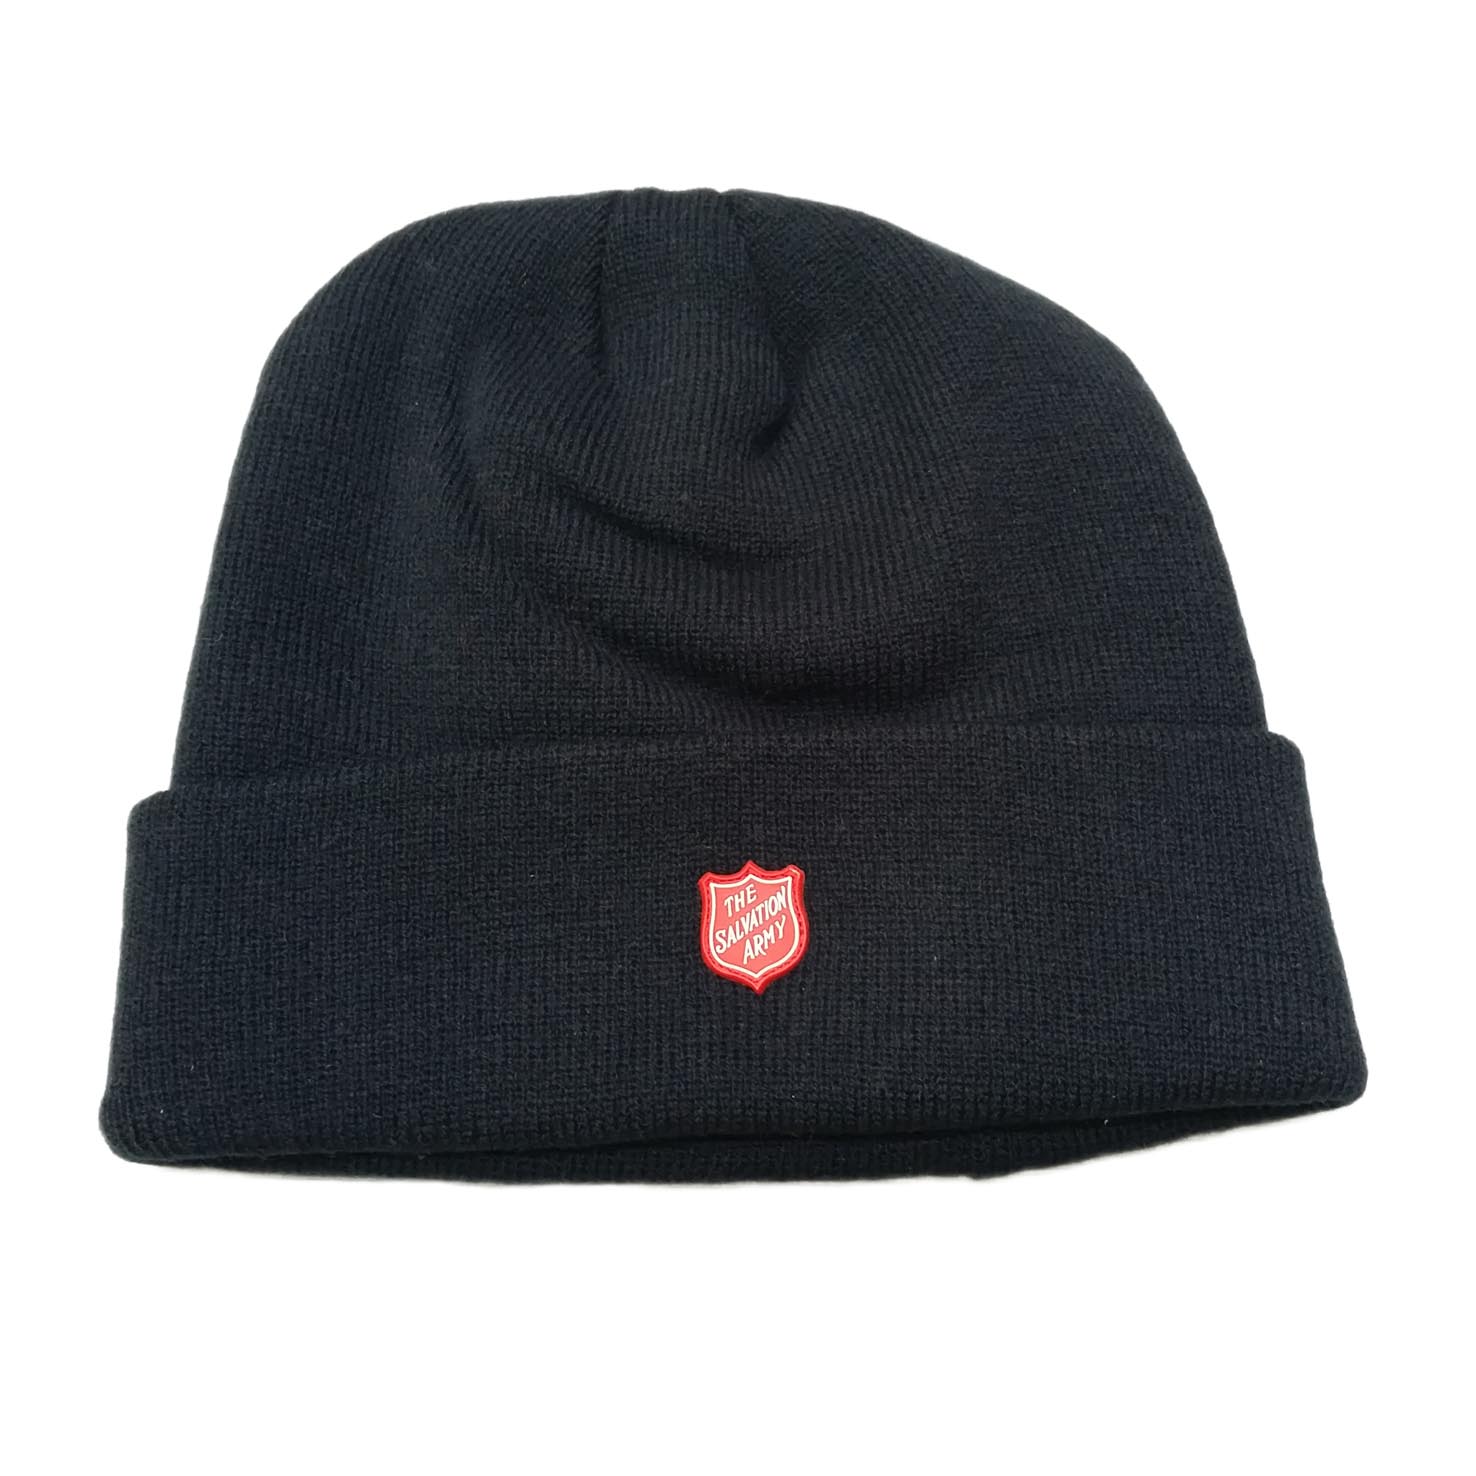 Navy Blue Thermal Insulated Hat